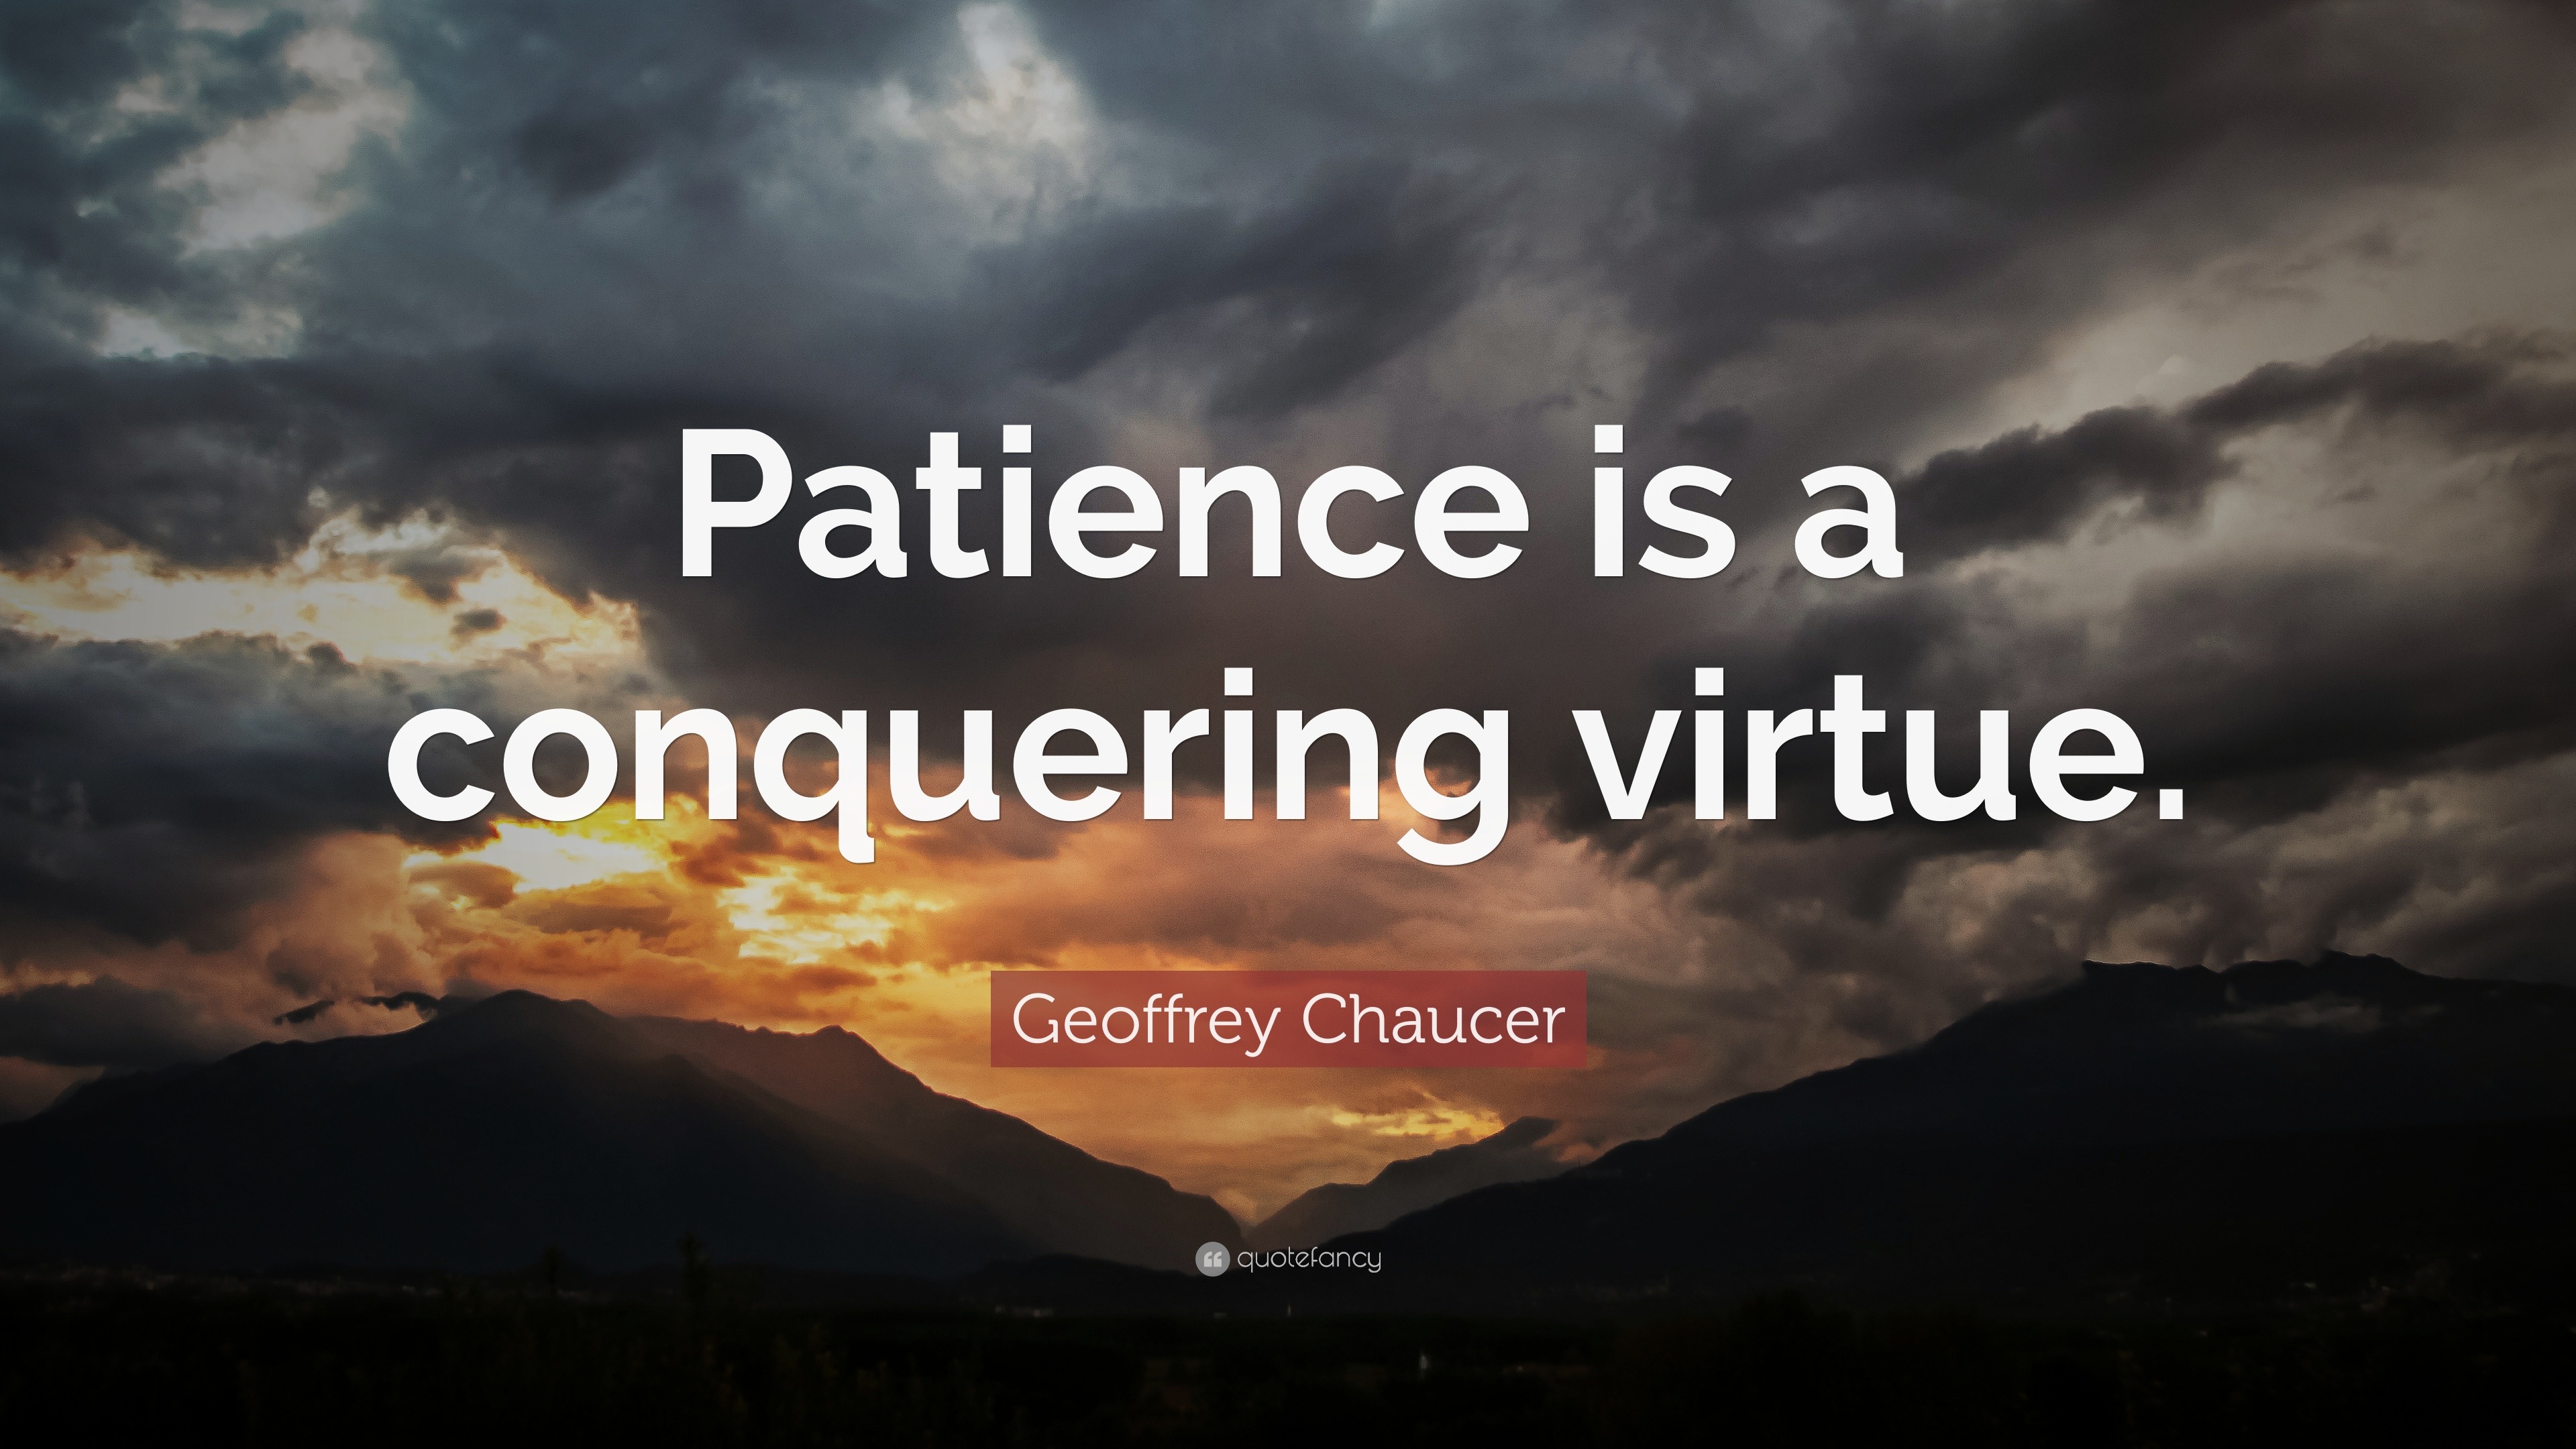 Geoffrey Chaucer Quote: “Patience is a conquering virtue.” (22